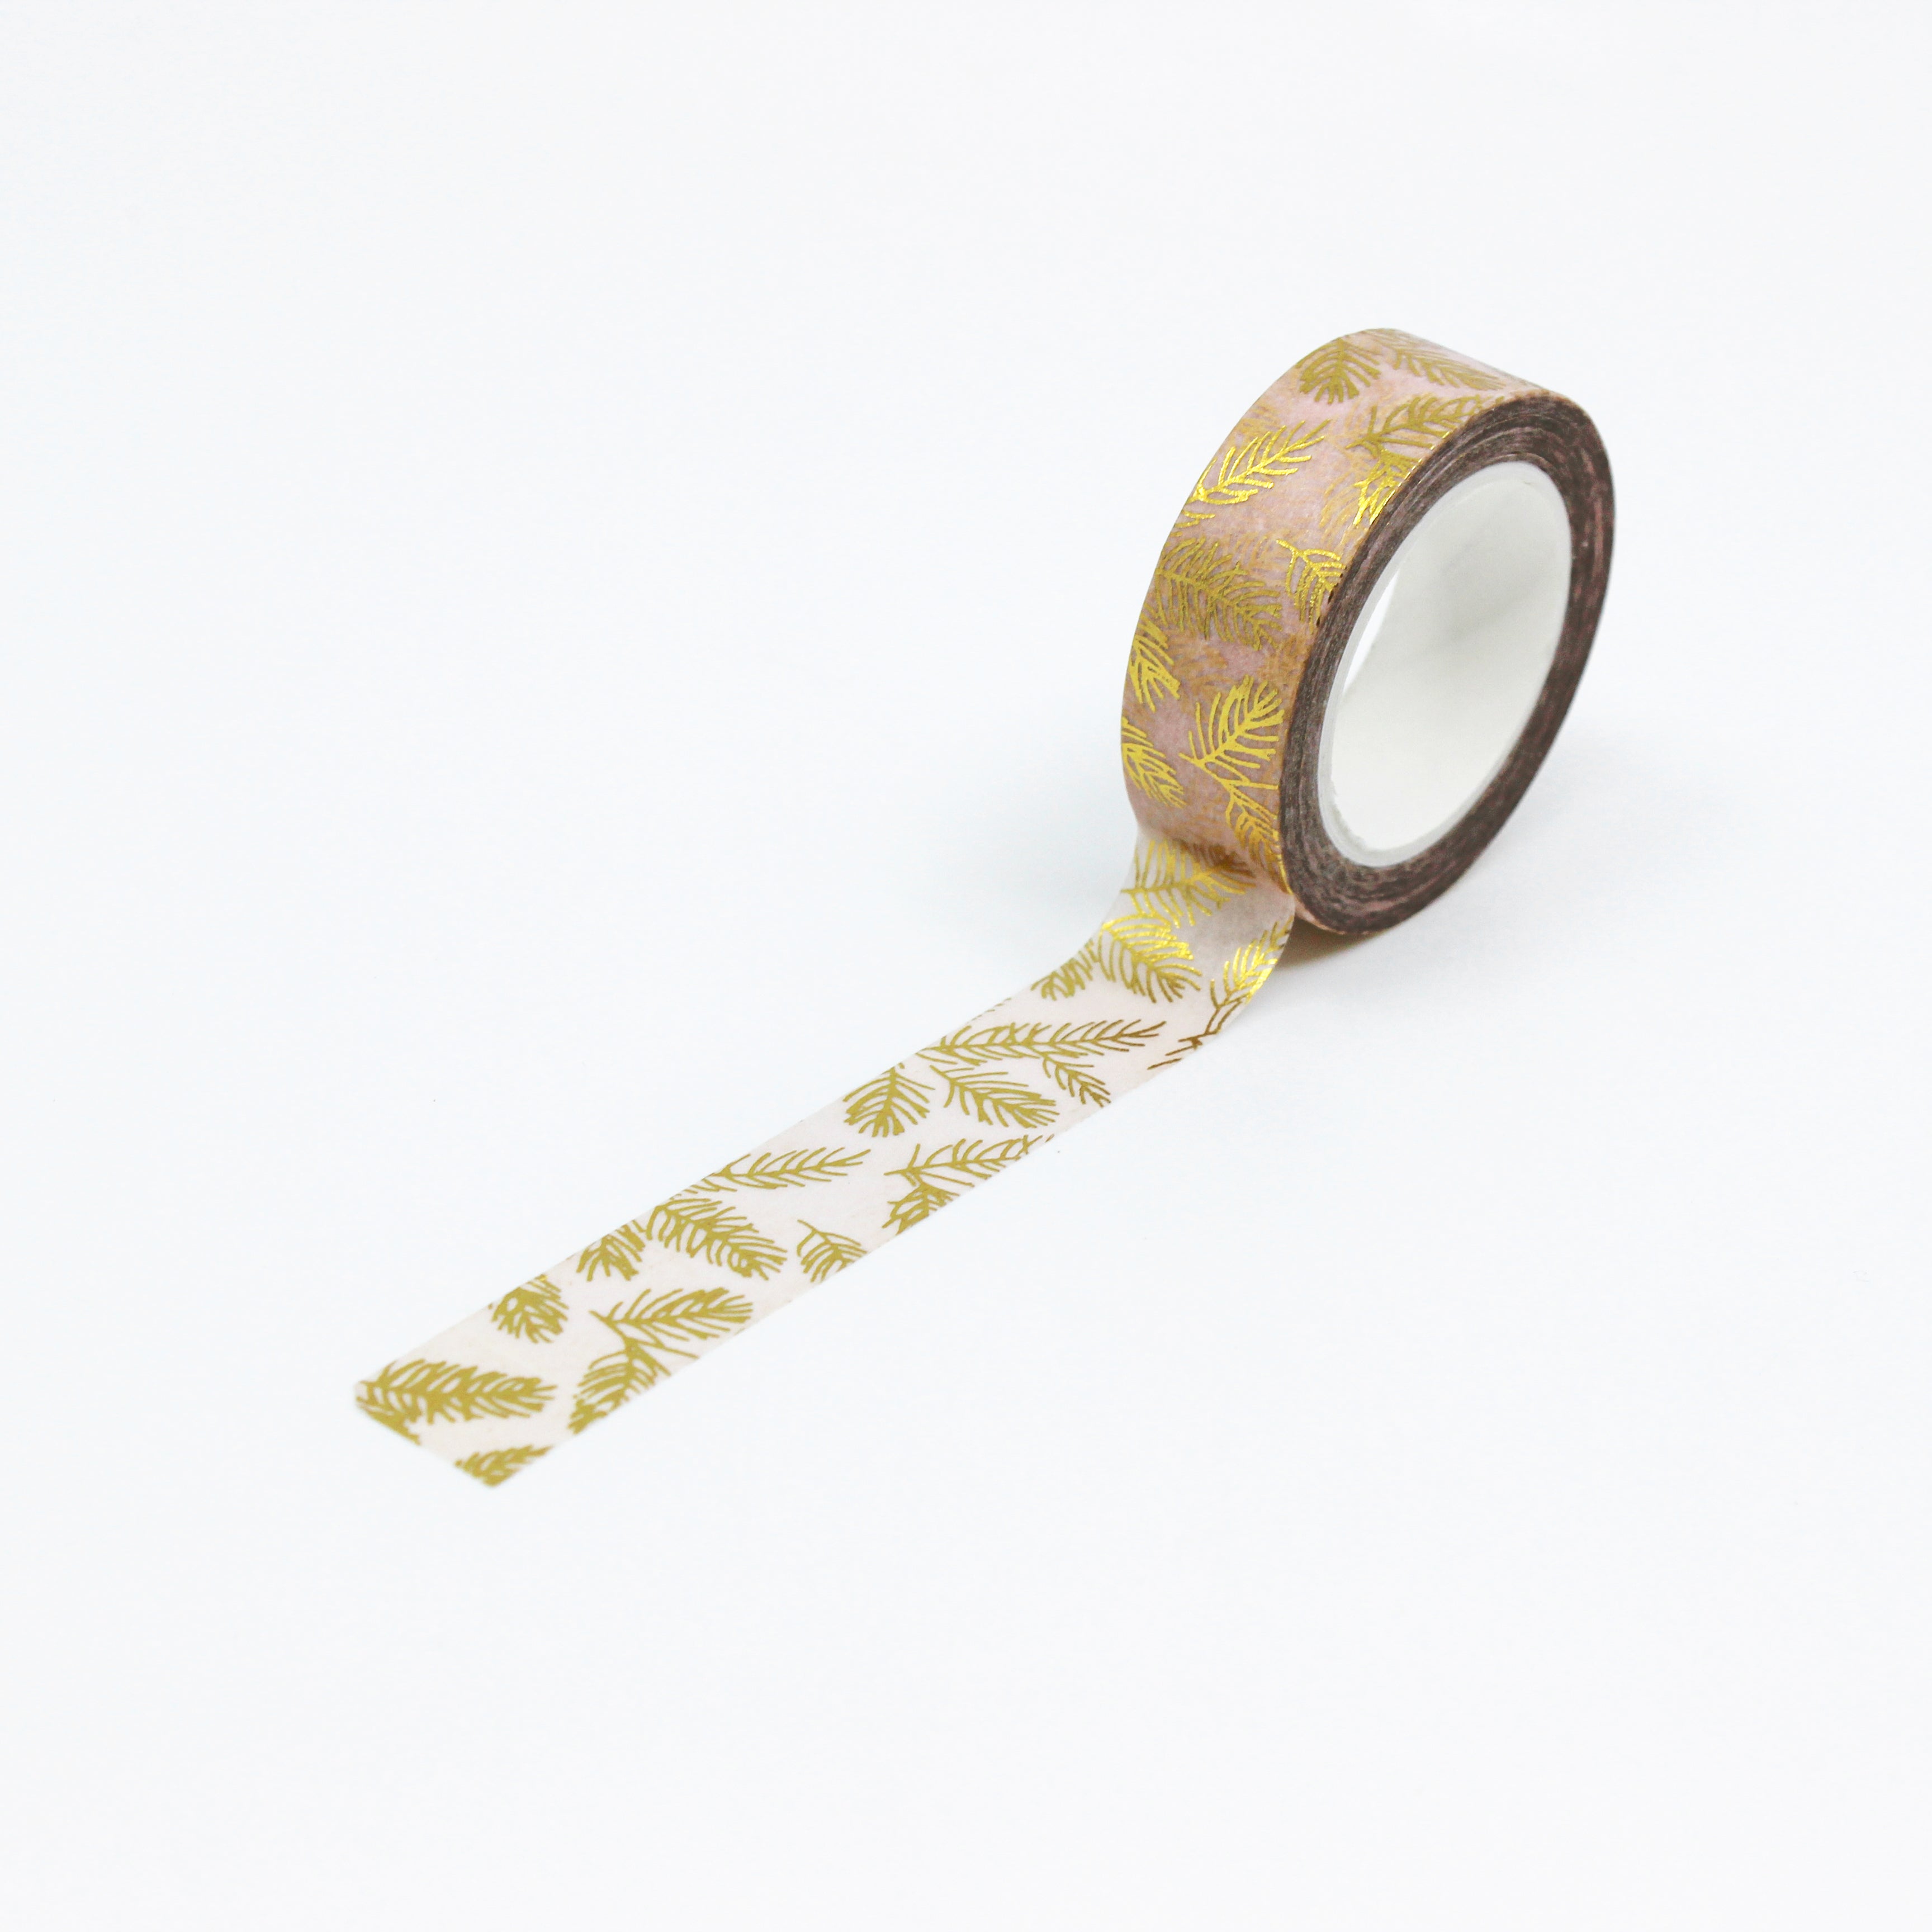 This is a full pattern repeat view of gold foil pine tree leave cones washi tape from BBB Supplies Craft Shop